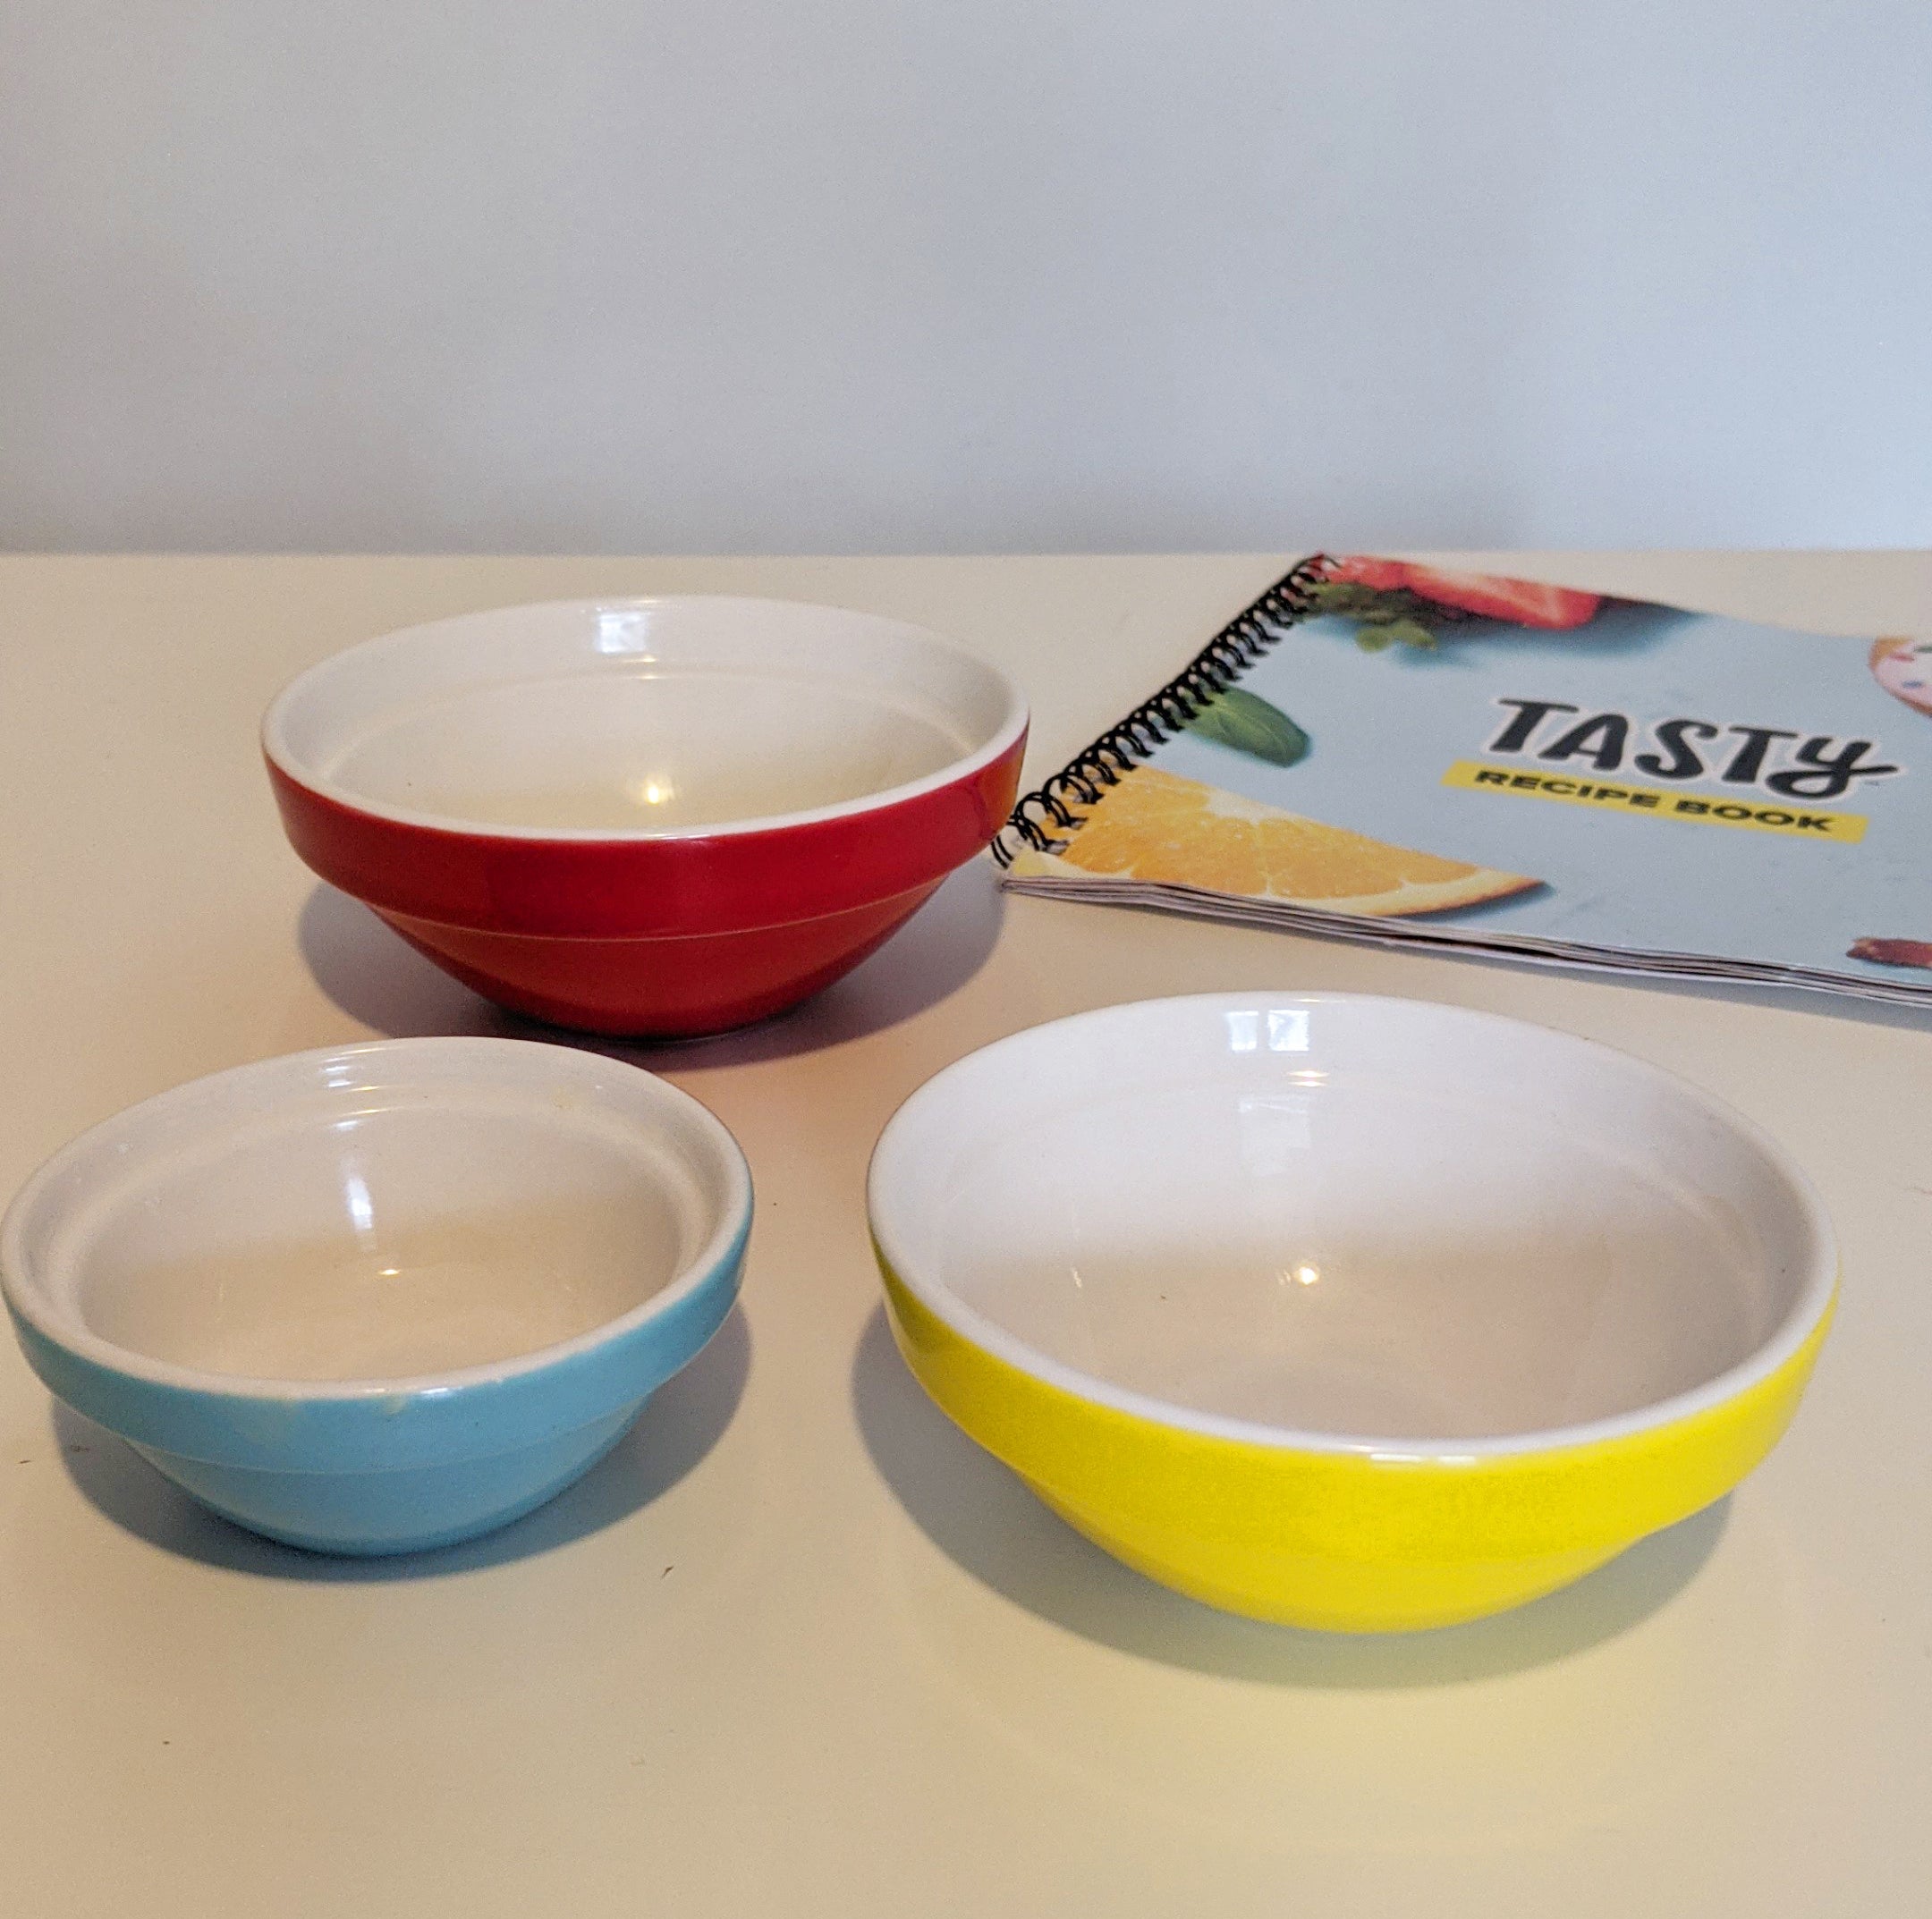 Three pinch bowls of different sizes on a table with a recipe book